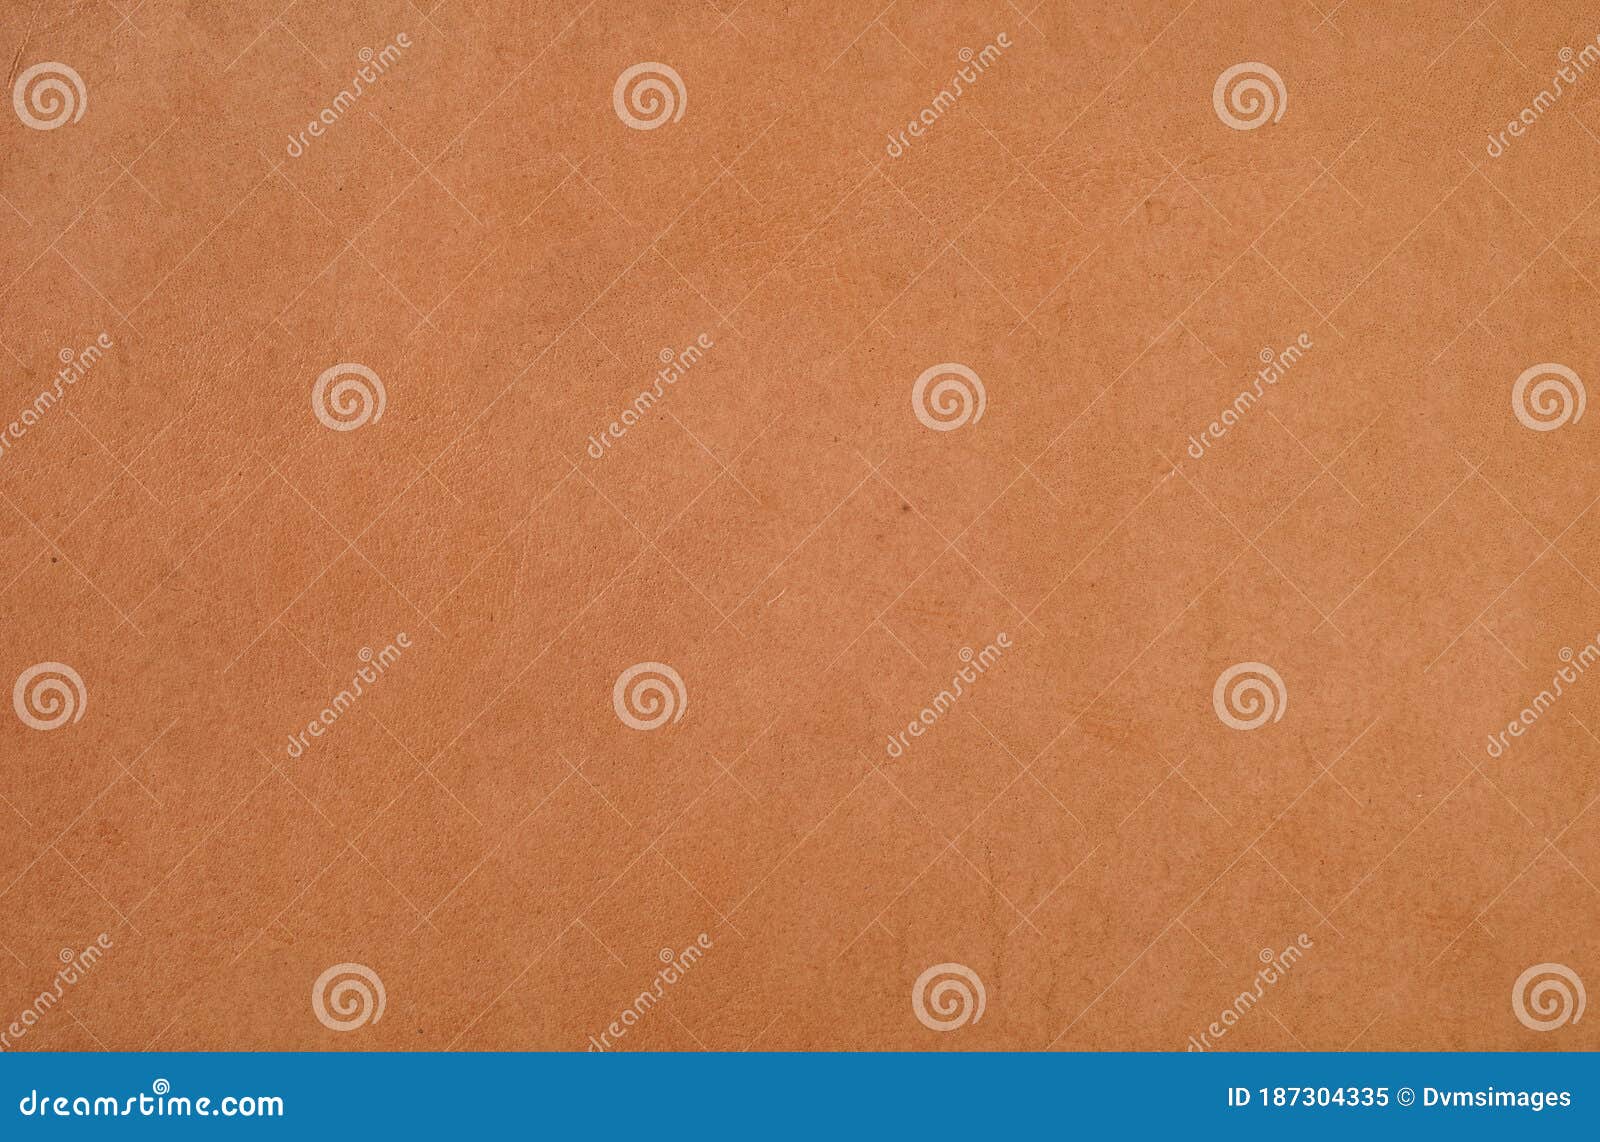 smooth tan leather texture background